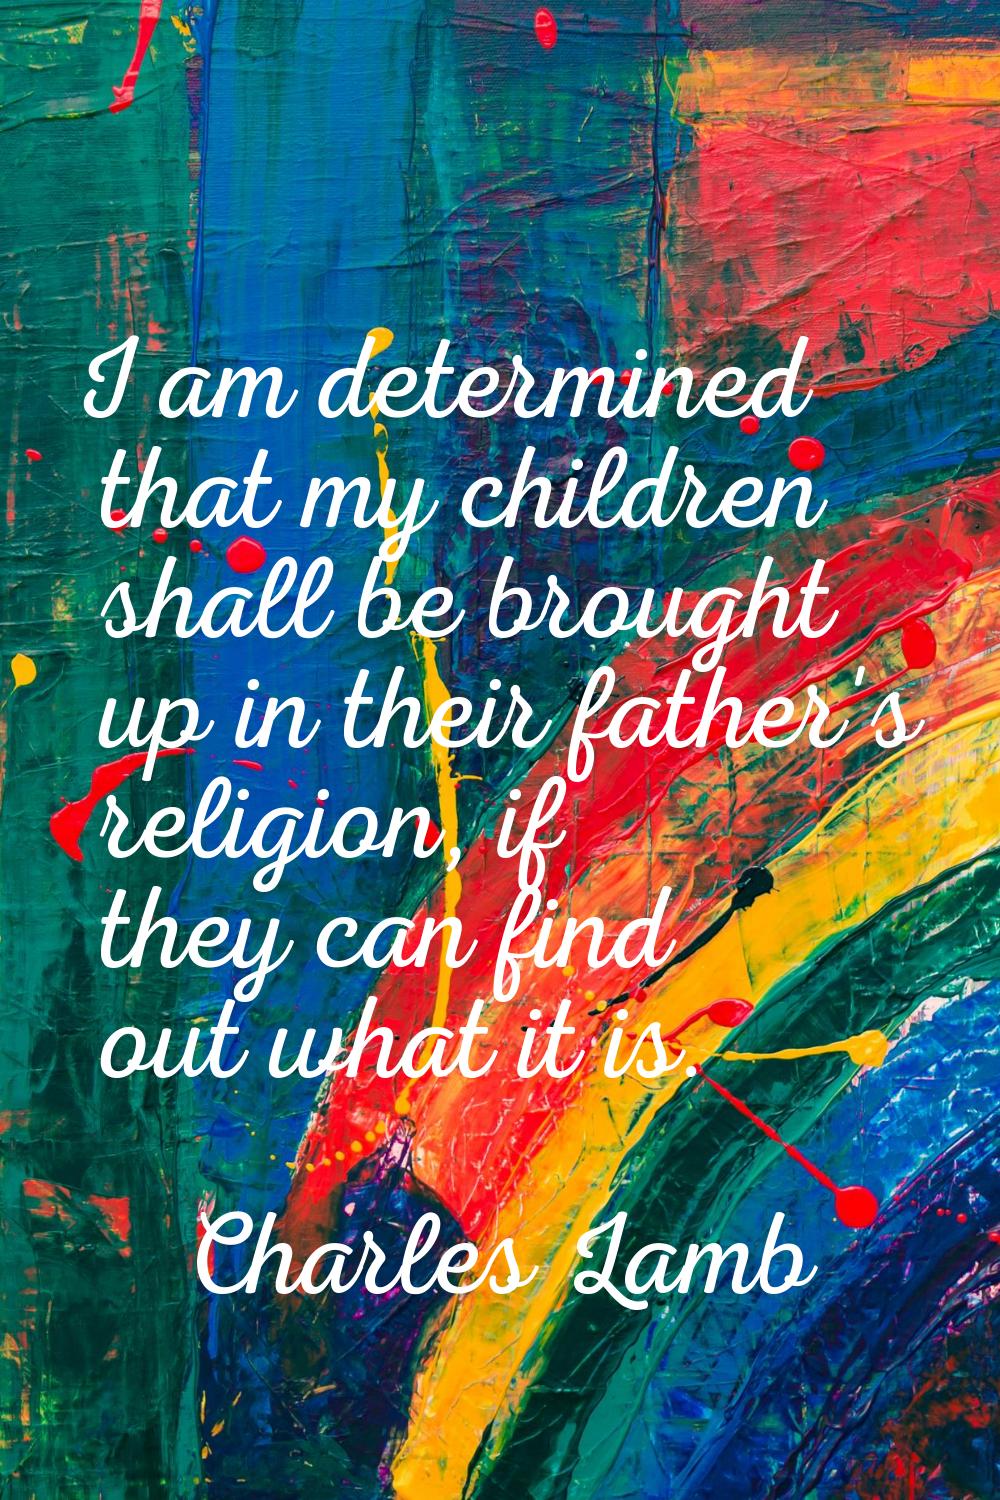 I am determined that my children shall be brought up in their father's religion, if they can find o